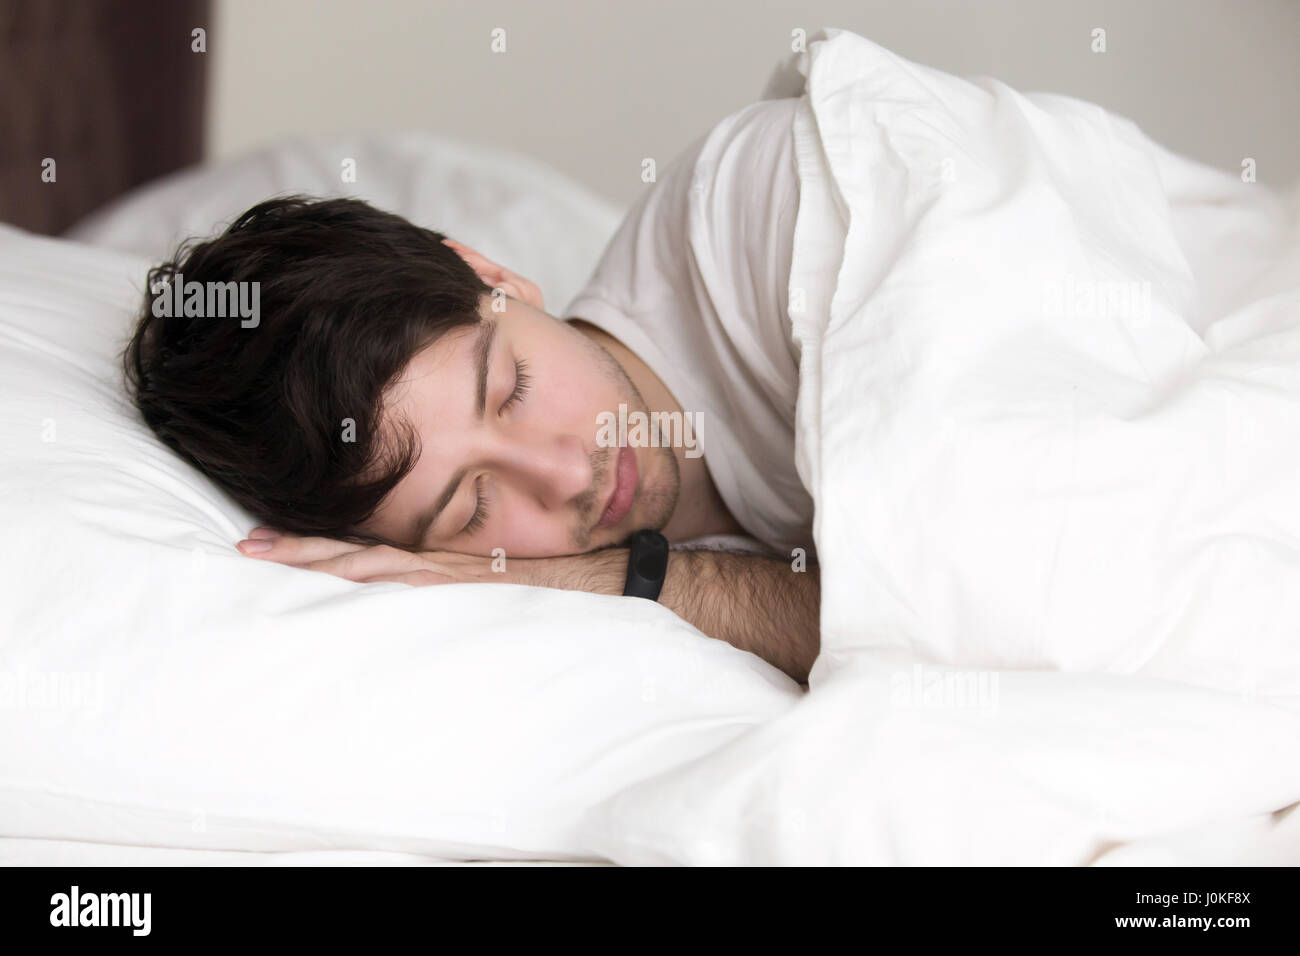 Handsome man asleep in bed wearing wristband for sleep tracking Stock Photo